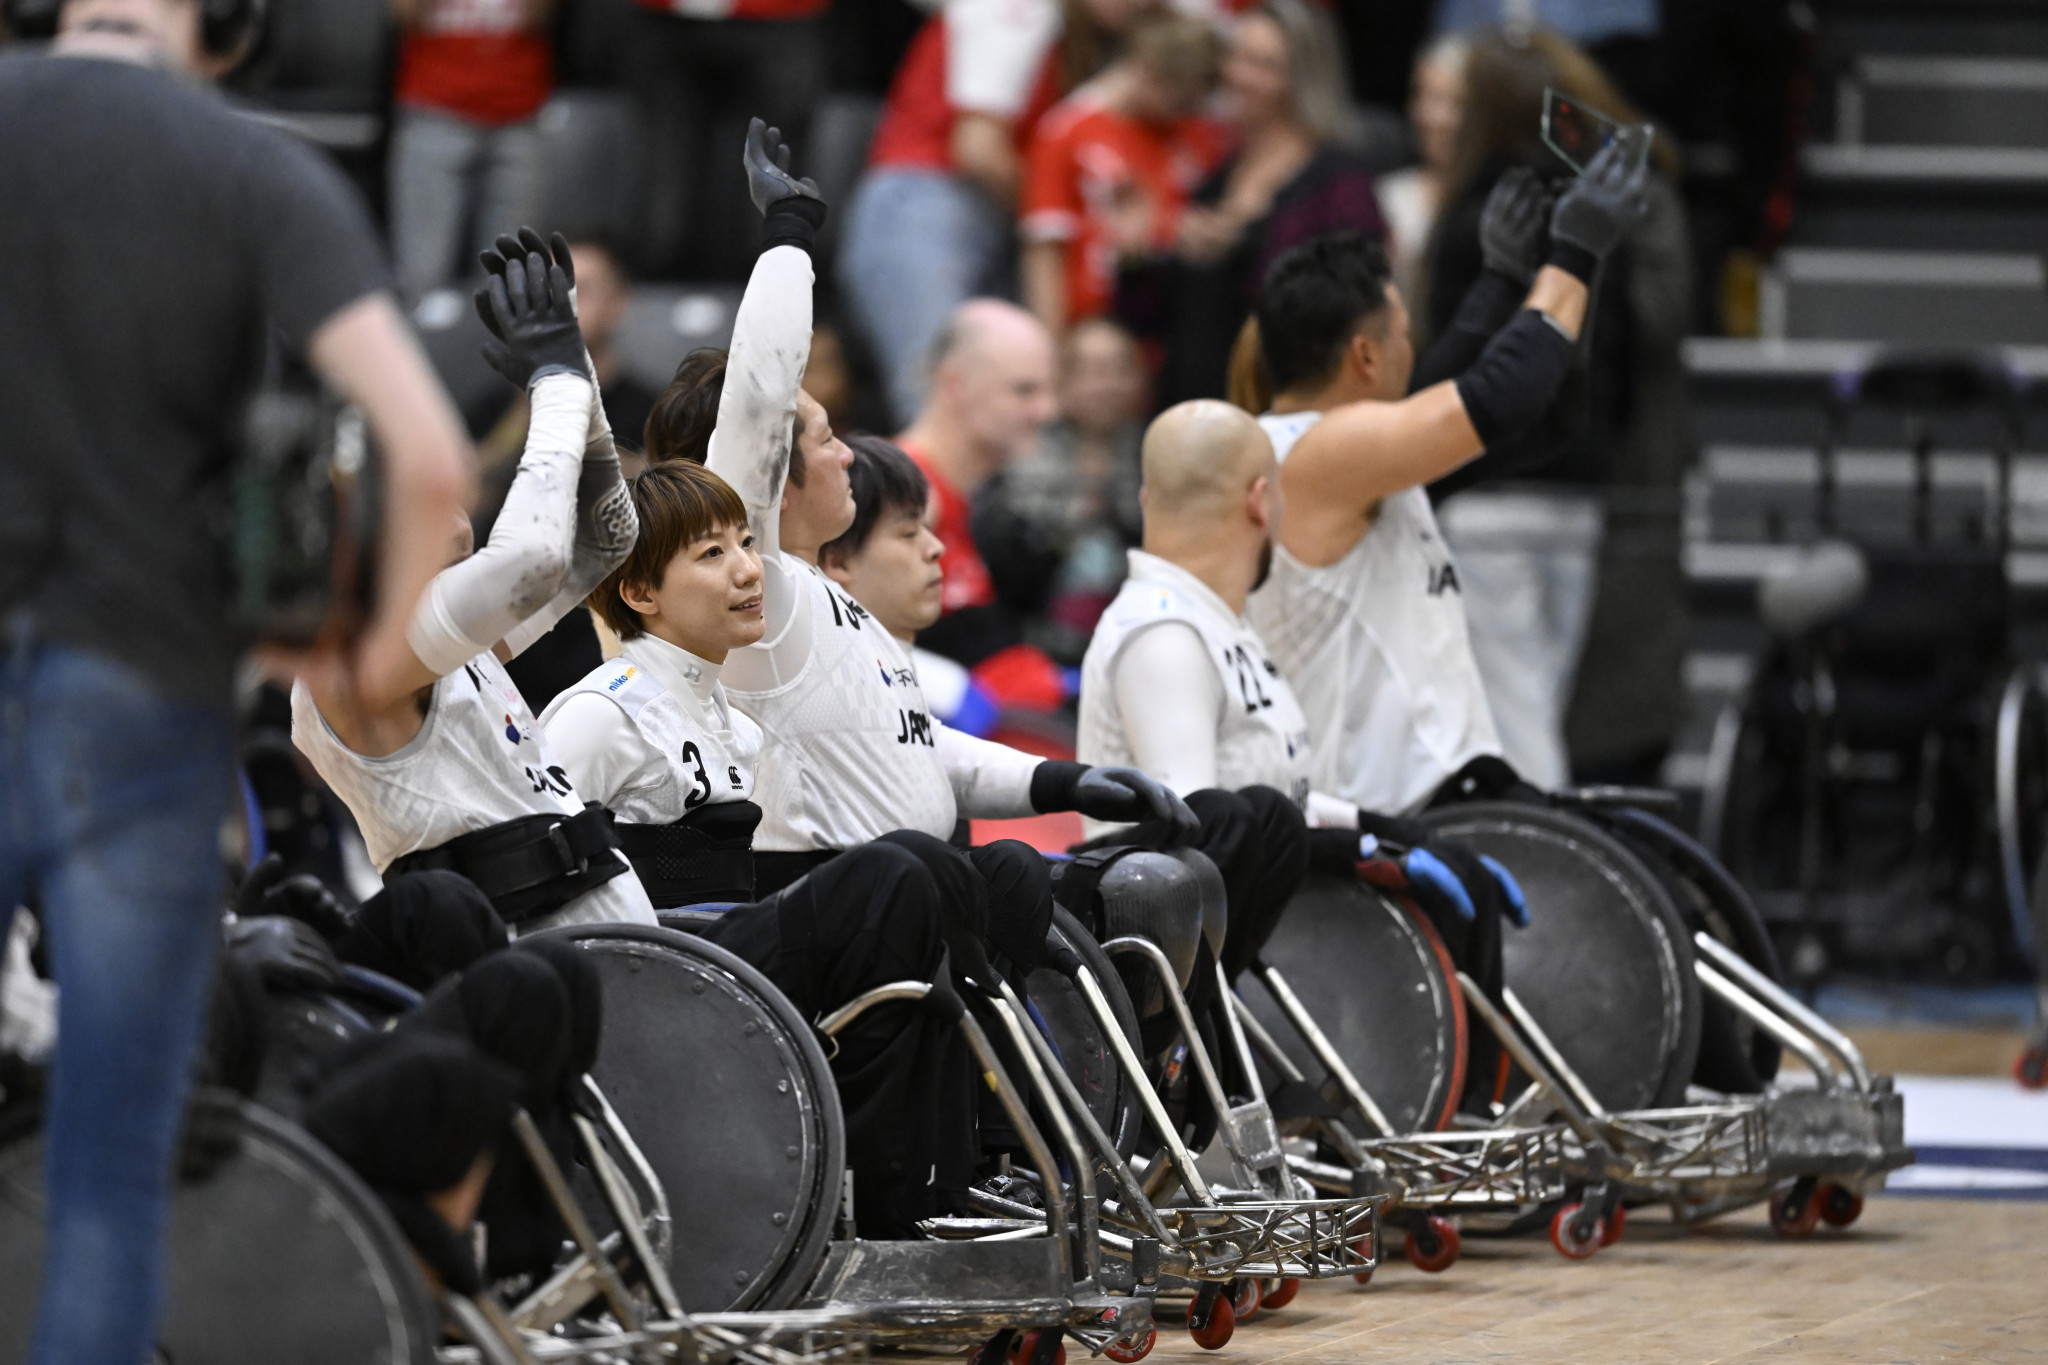 Japan secured a bronze medal in the campaign where they were the defending champions ©Lars Møller/Parasport Denmark